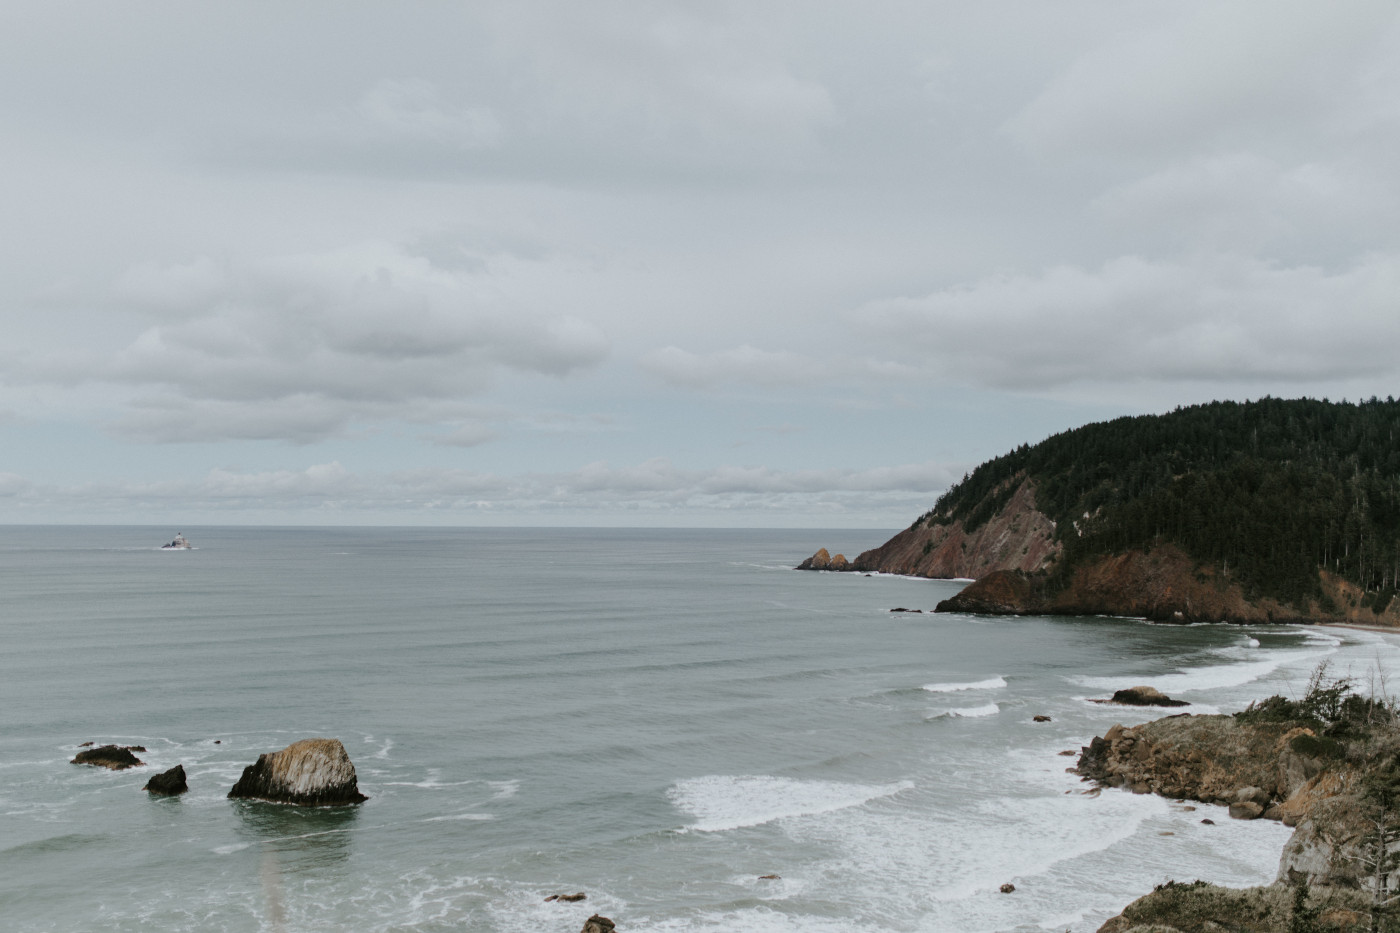 A view of the cliffs at Cannon Beach. Elopement wedding photography at Cannon Beach by Sienna Plus Josh.